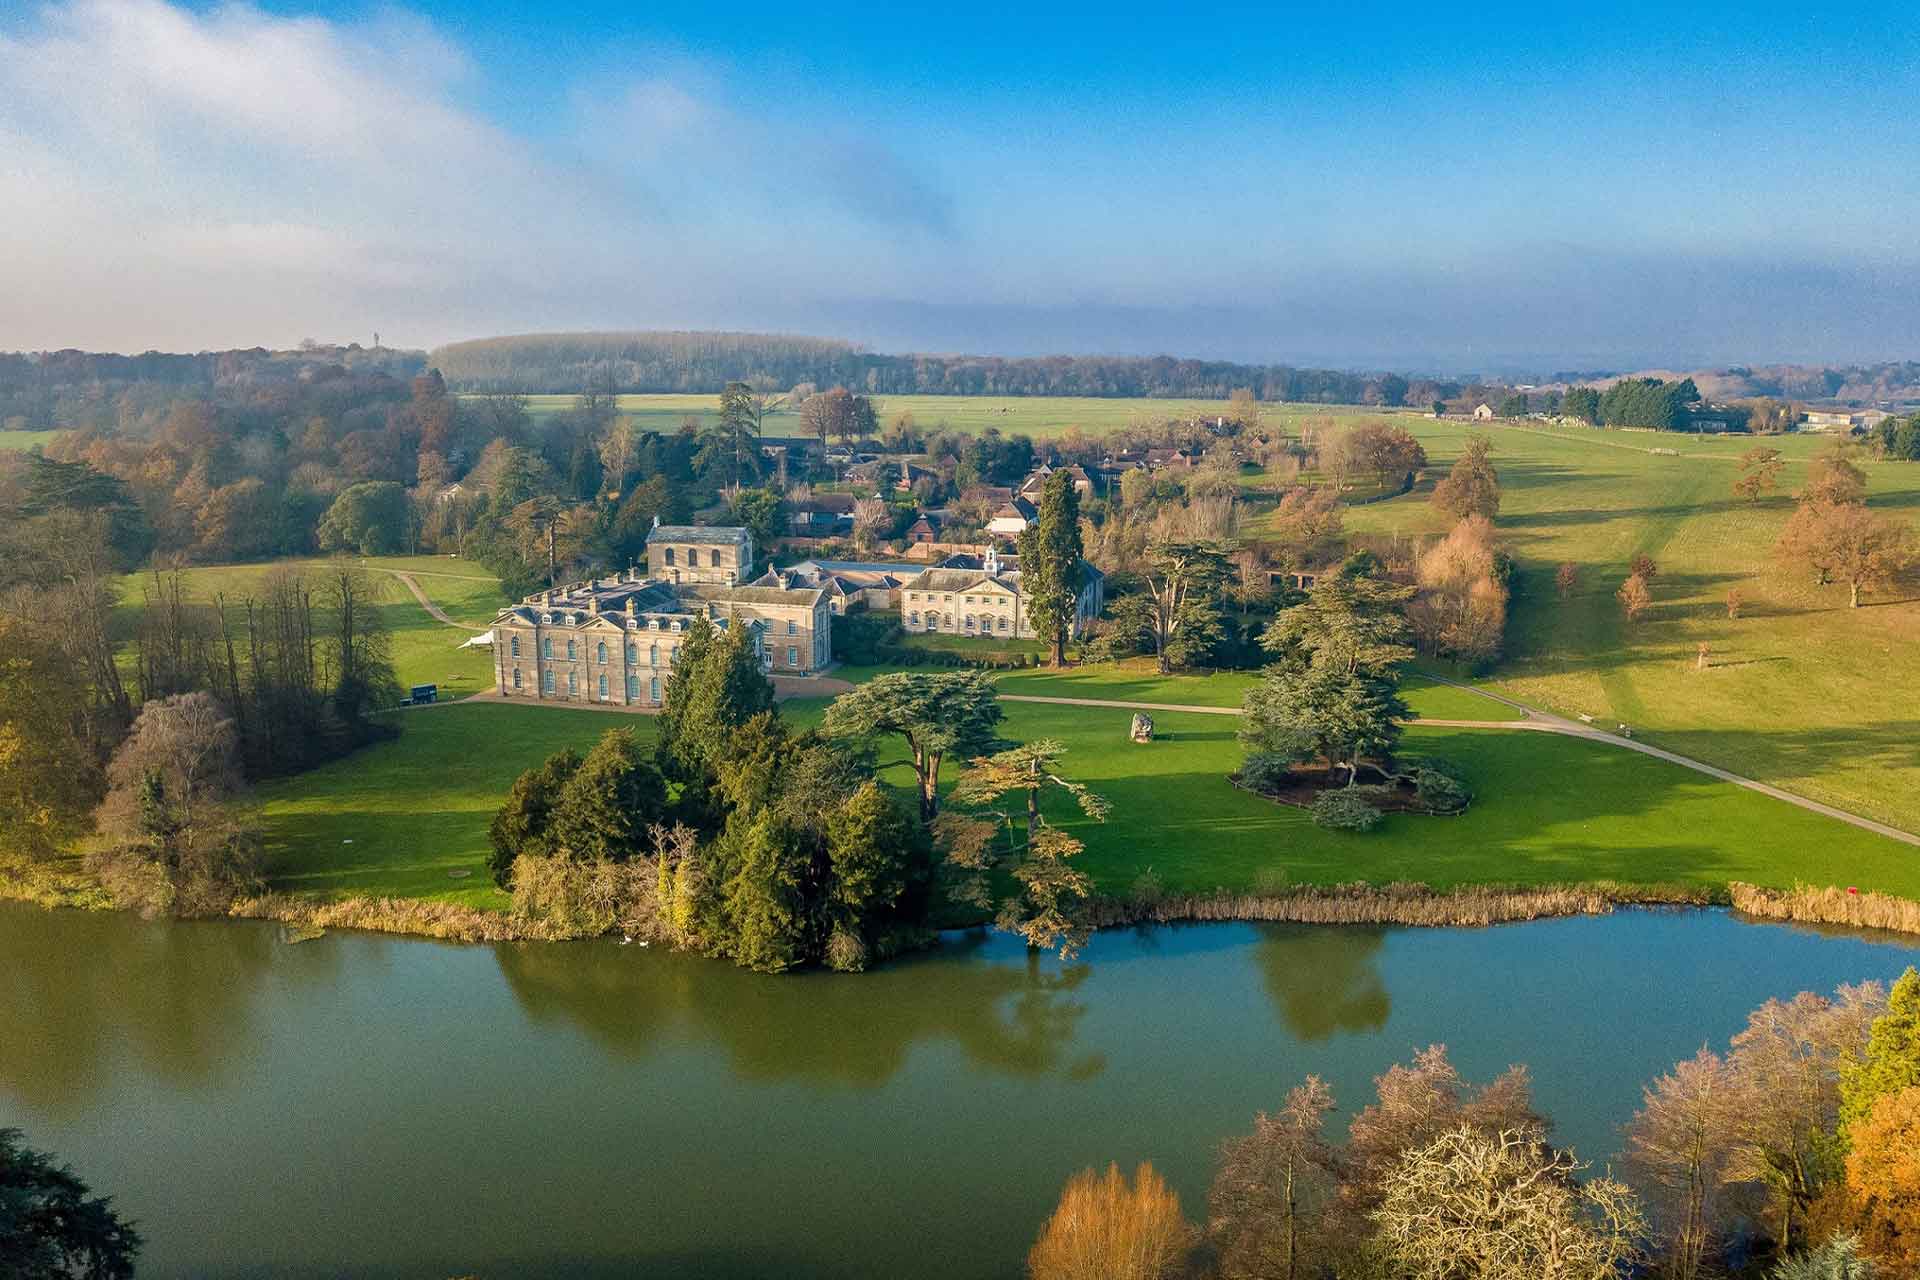 Aerial view of Compton Verney estate, with grounds and a lake.